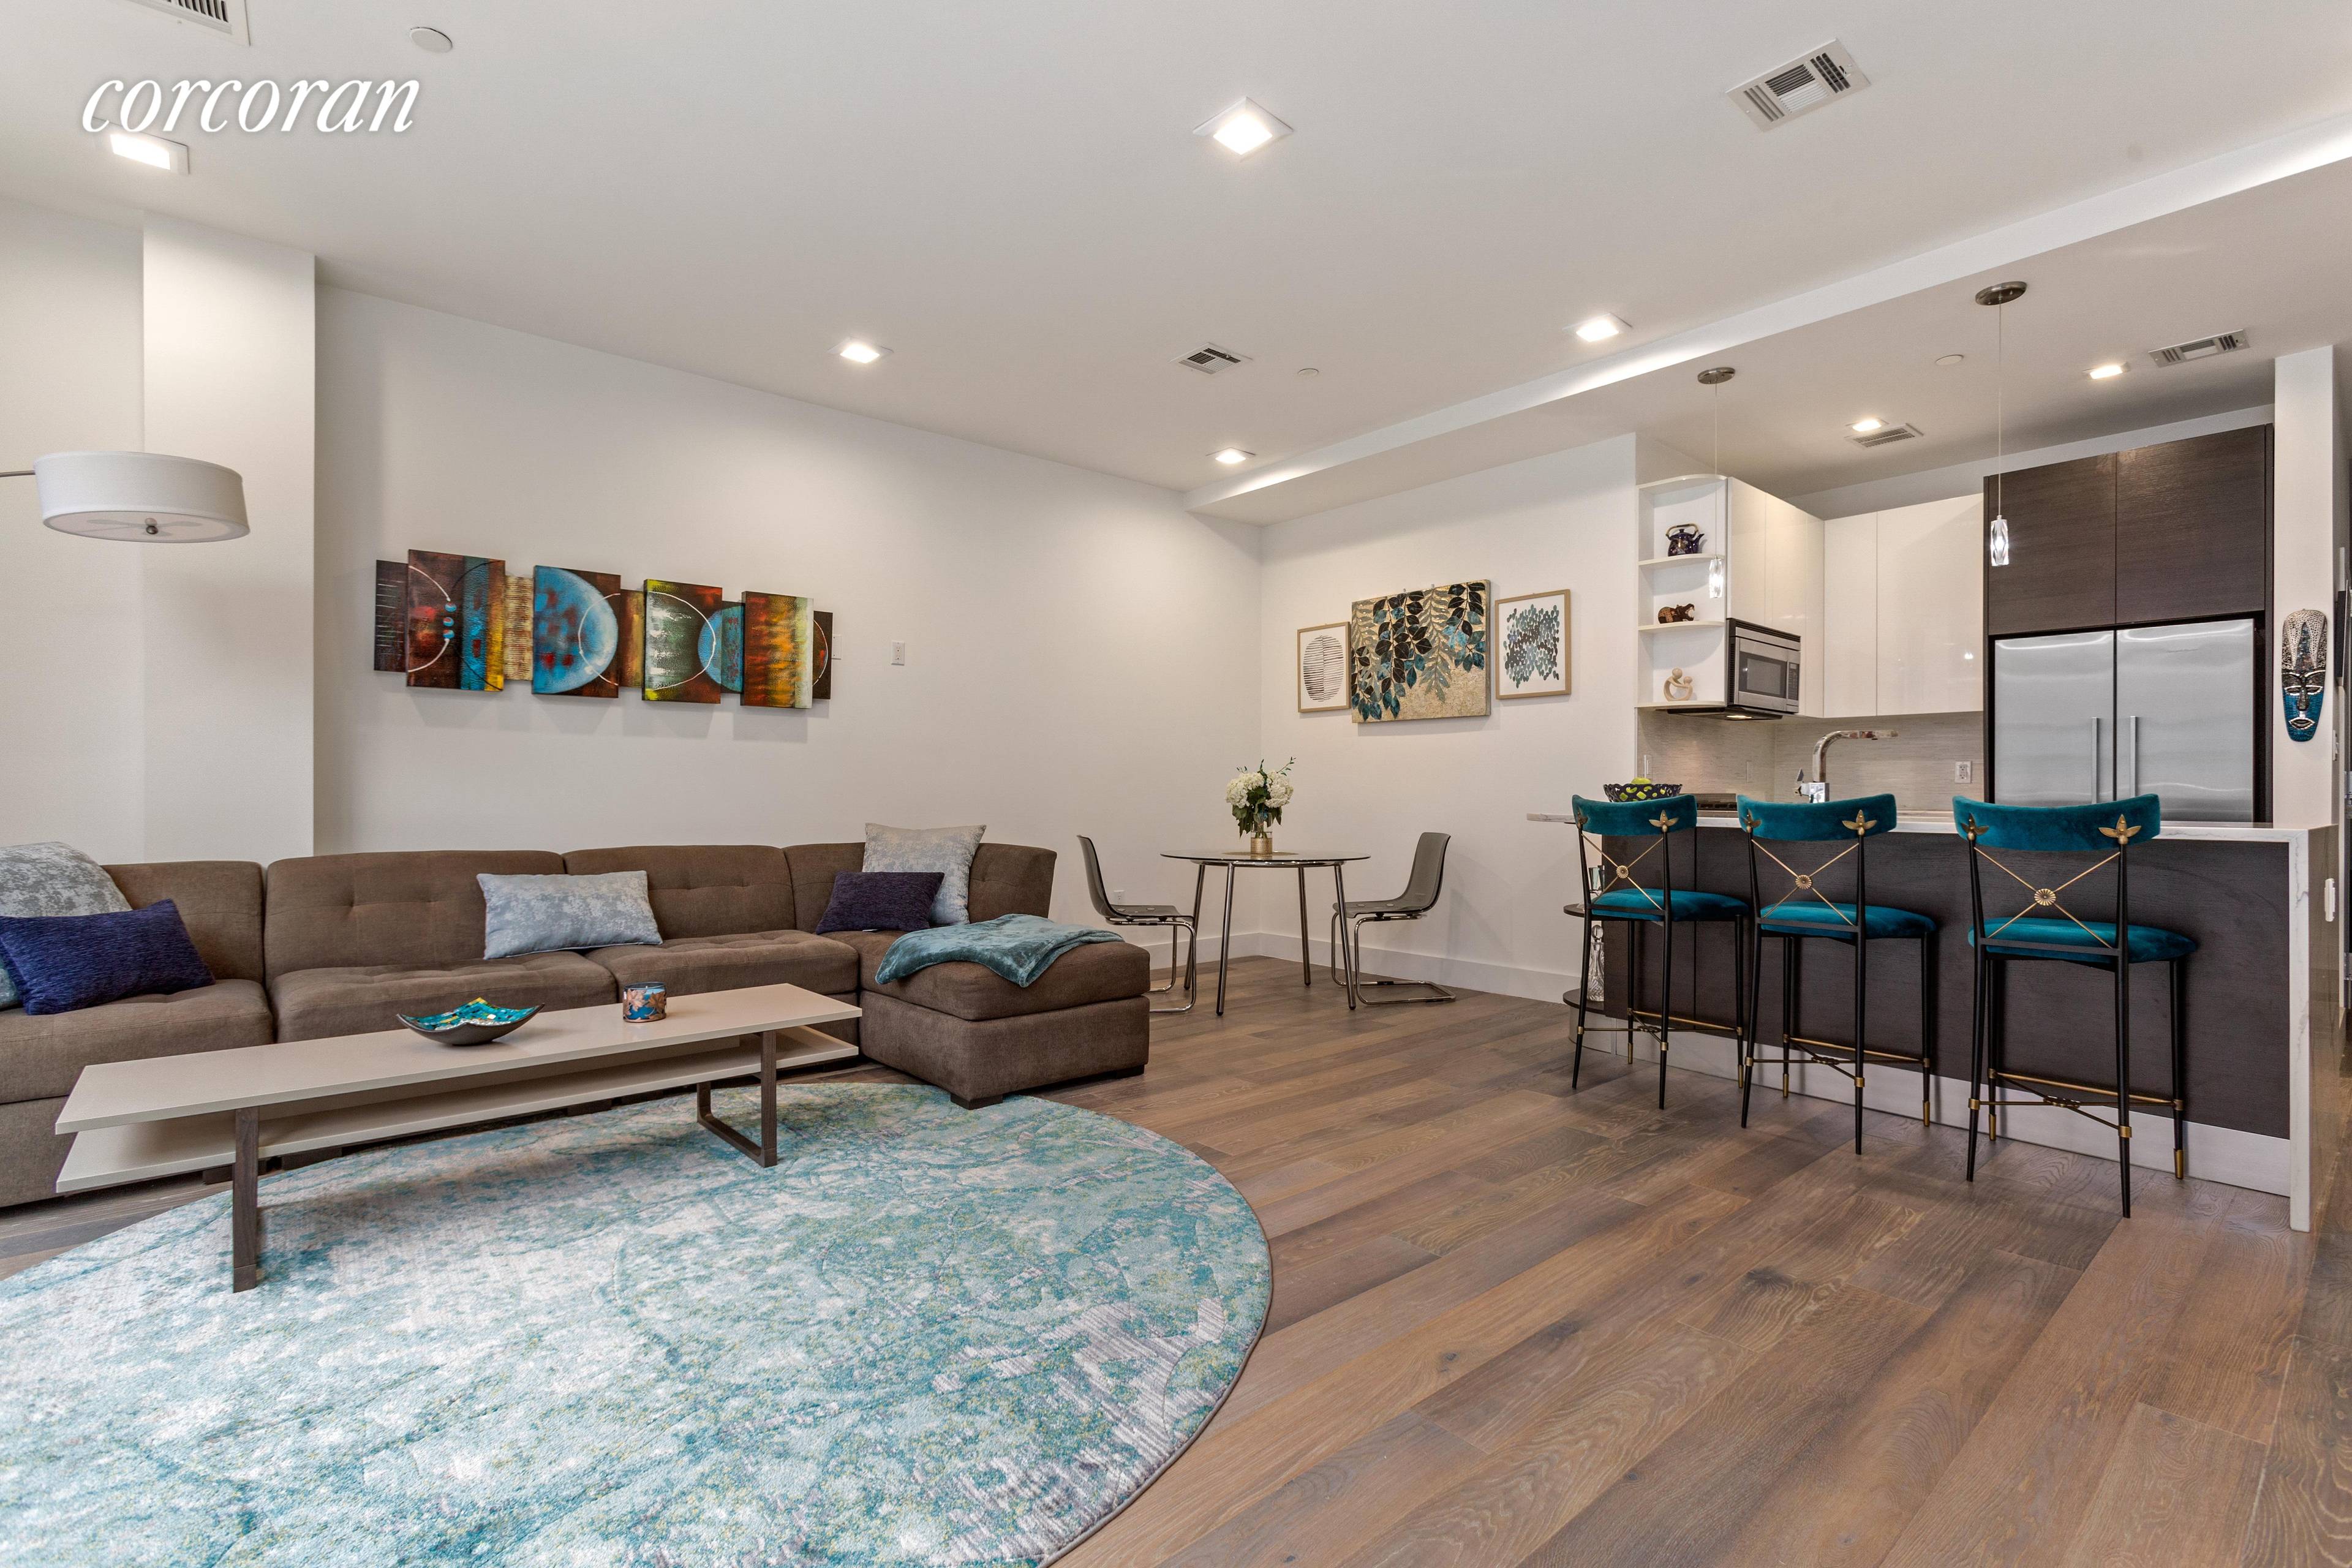 Welcome home to 1769 E 13th Street Unit 3B your modern two bedroom, two bathroom luxury condo in the breathtaking Lighthouse Condominium and Spa in Midwood, Brooklyn.